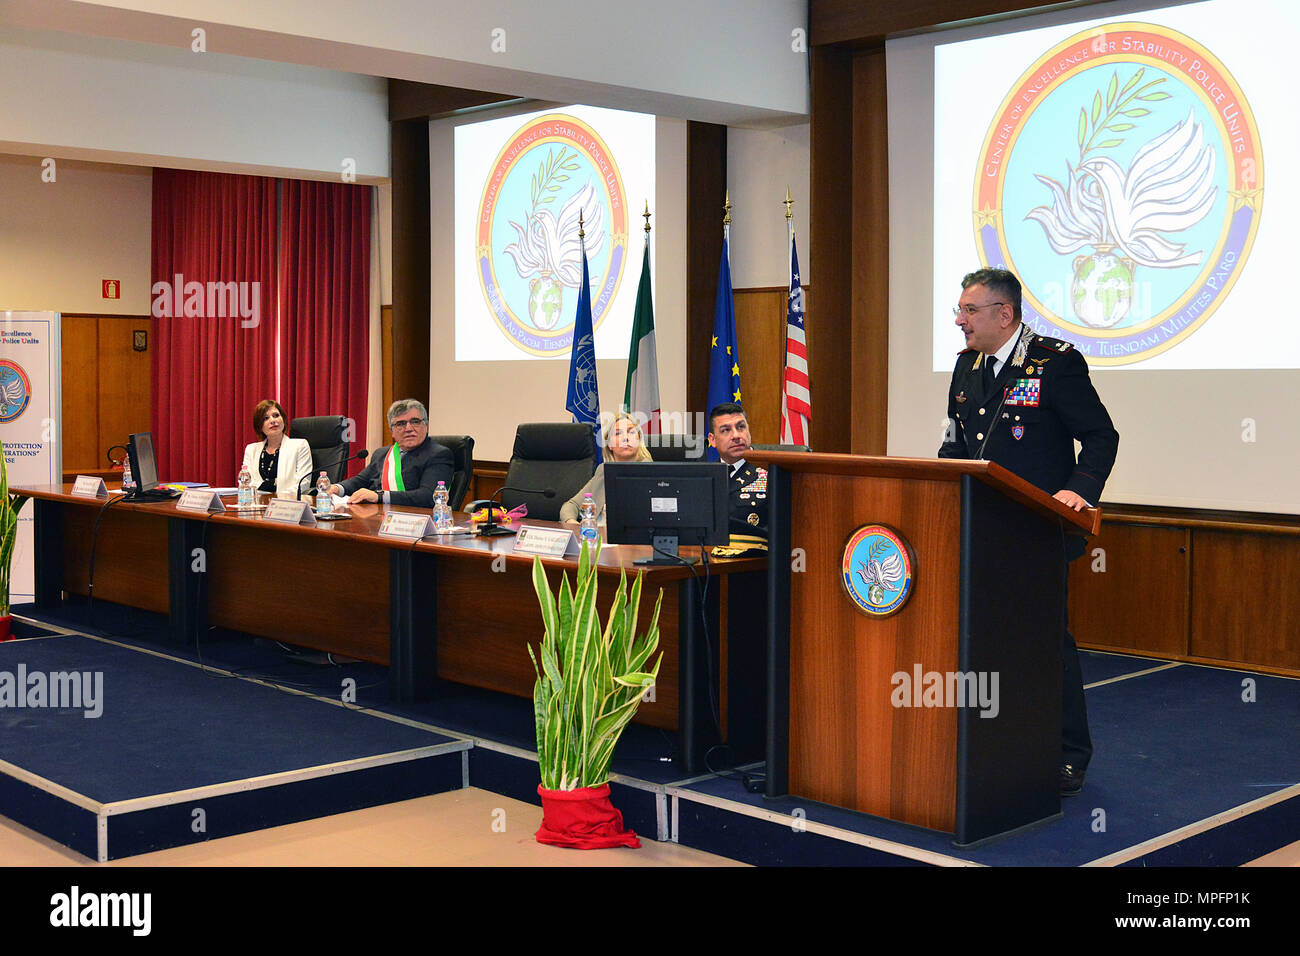 Brig. Gen. Giovanni Pietro Barbano , Center of Excellence for Stability Police Units (CoESPU) director, addresses attendees at the opening ceremony of the 5th “Gender Protection in Peace Operations” Course at the  CoESPU in Vicenza, Italy, Mar. 8, 2017. The event brought together military and civic leaders of the local community and offered the opportunity to celebrate International Women's Day. (U.S. Army Photo by Visual Information Specialist Paolo Bovo/released) Stock Photo